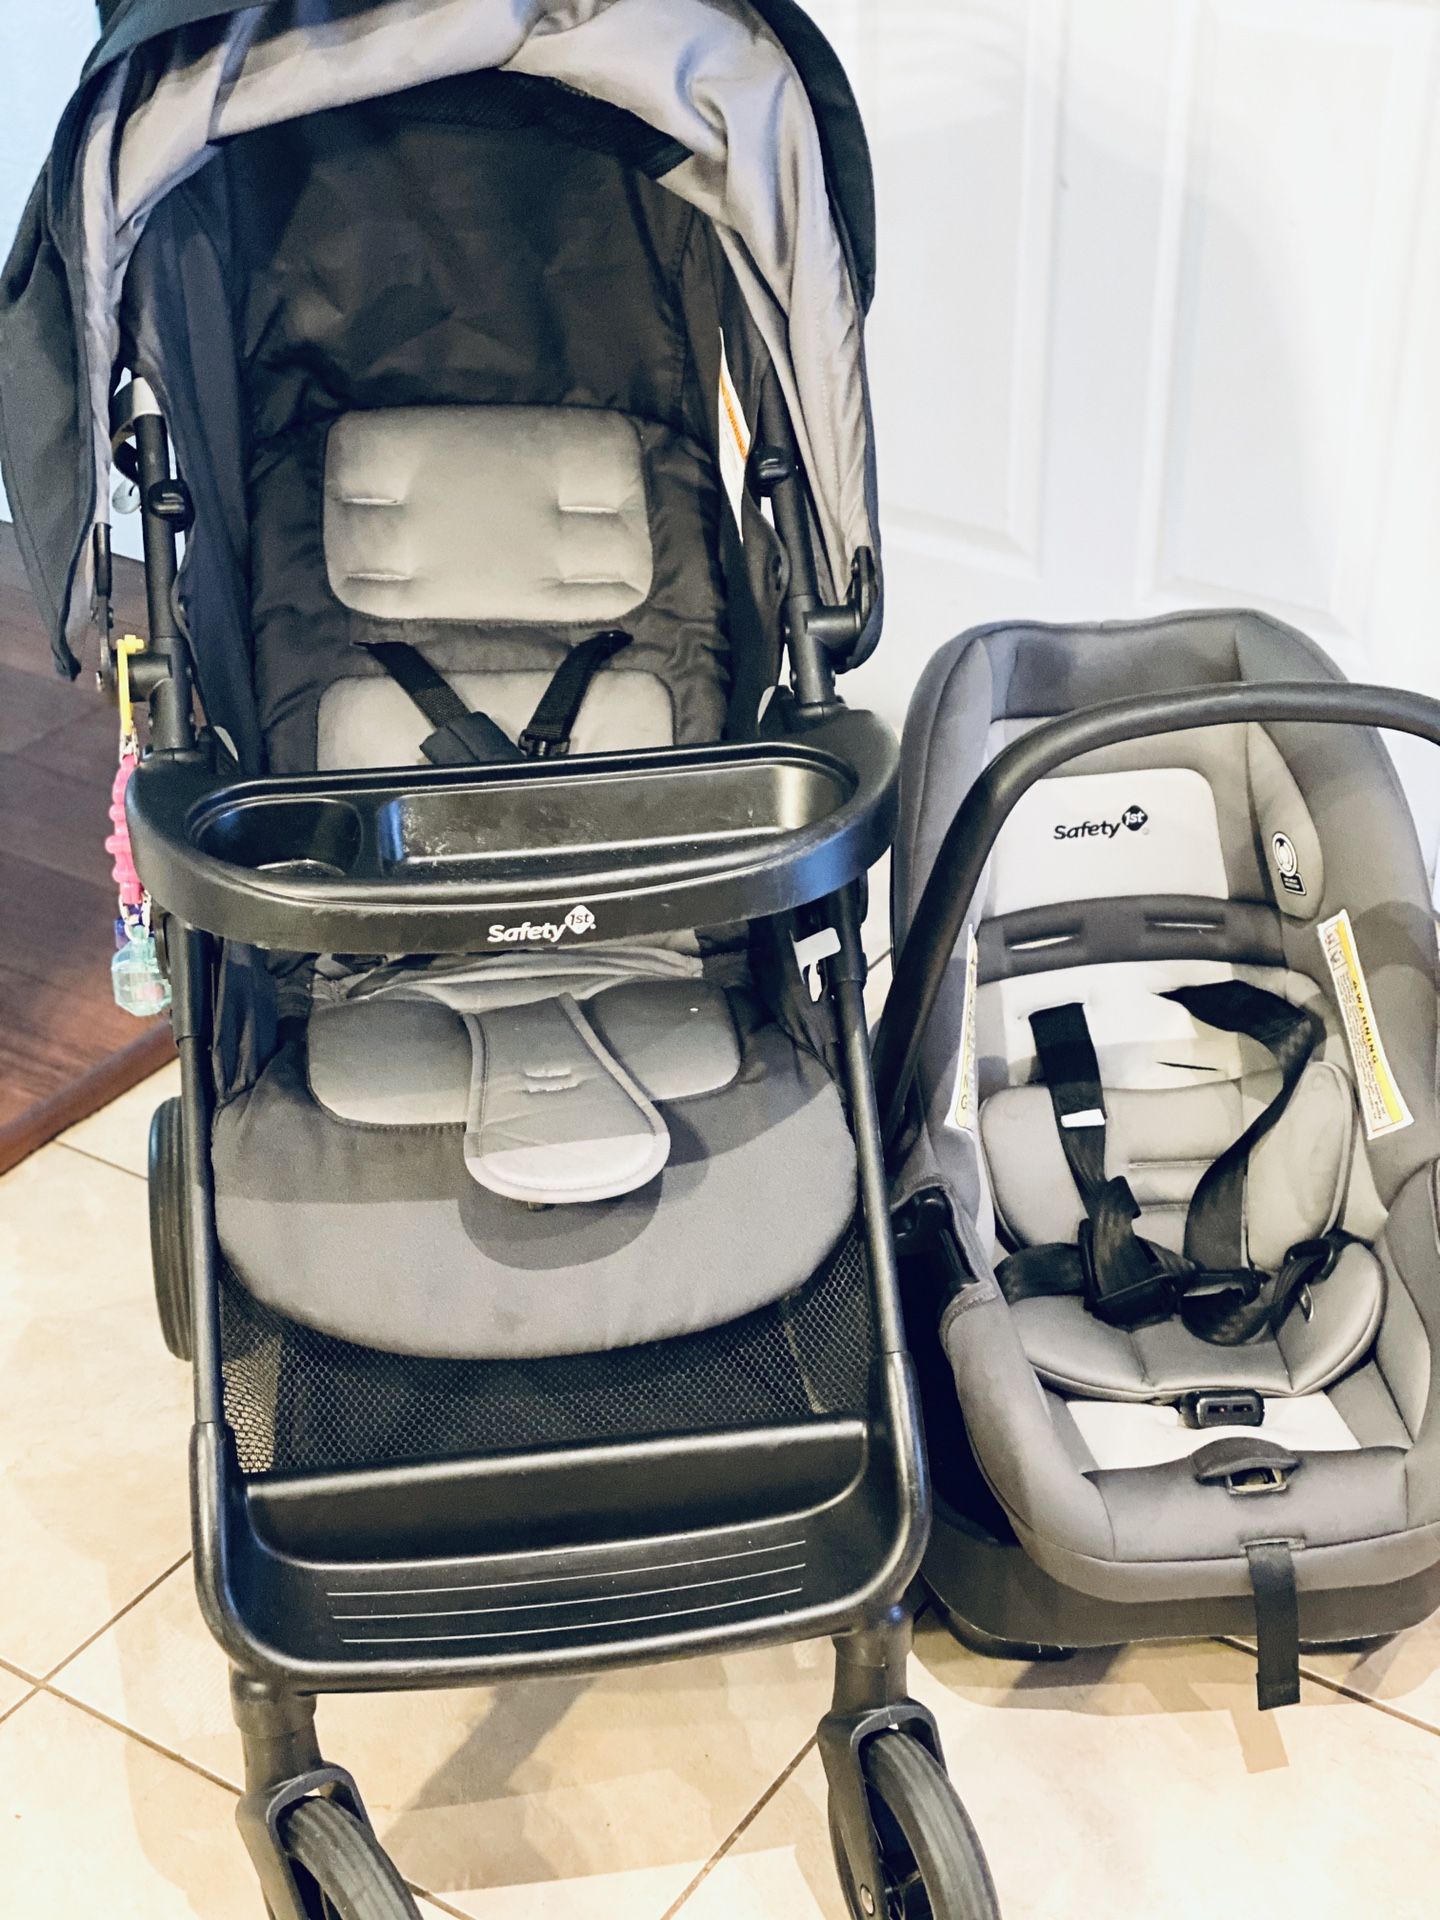 Safety 1st car seat and stroller